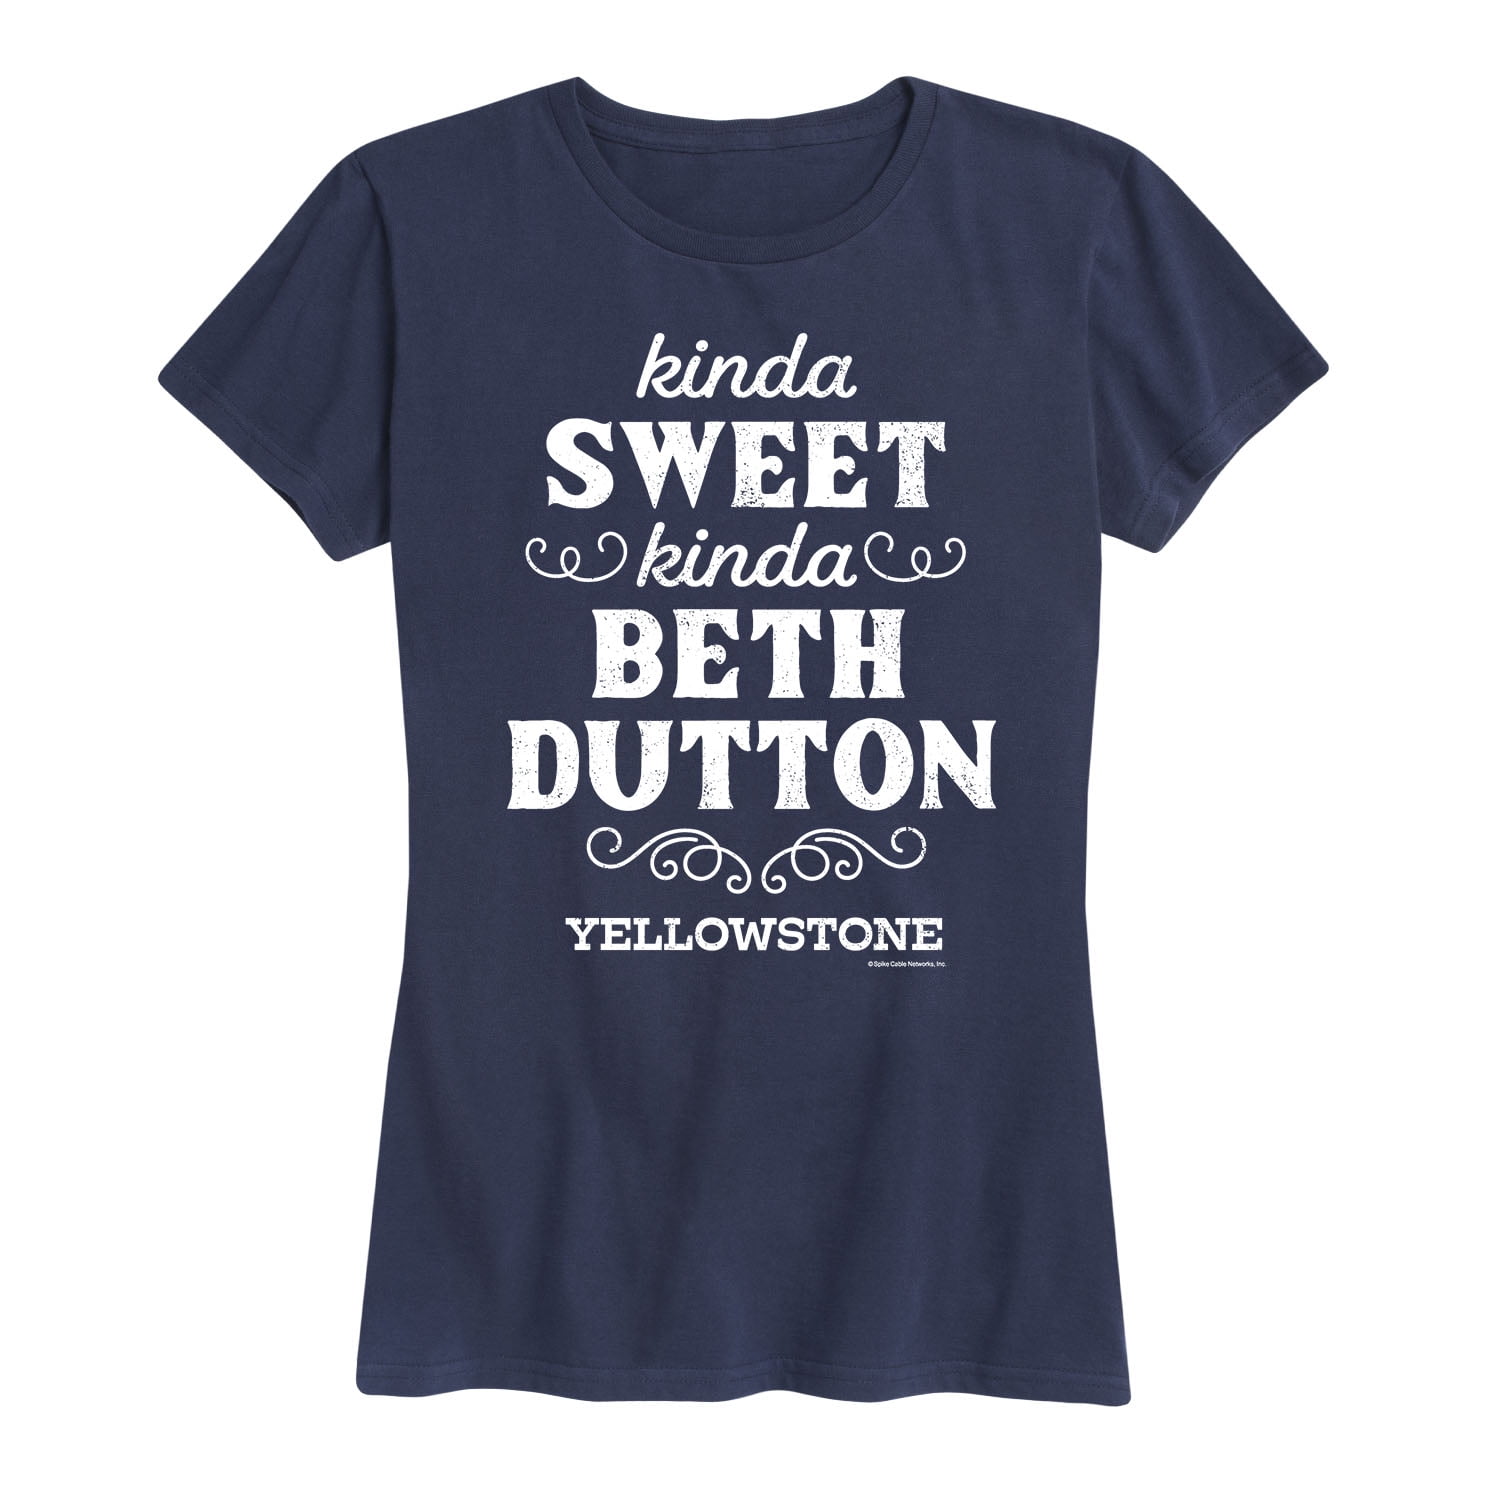 Yellowstone - Beth Dutton Inspirational Quote - Women's Short Sleeve  Graphic T-Shirt 